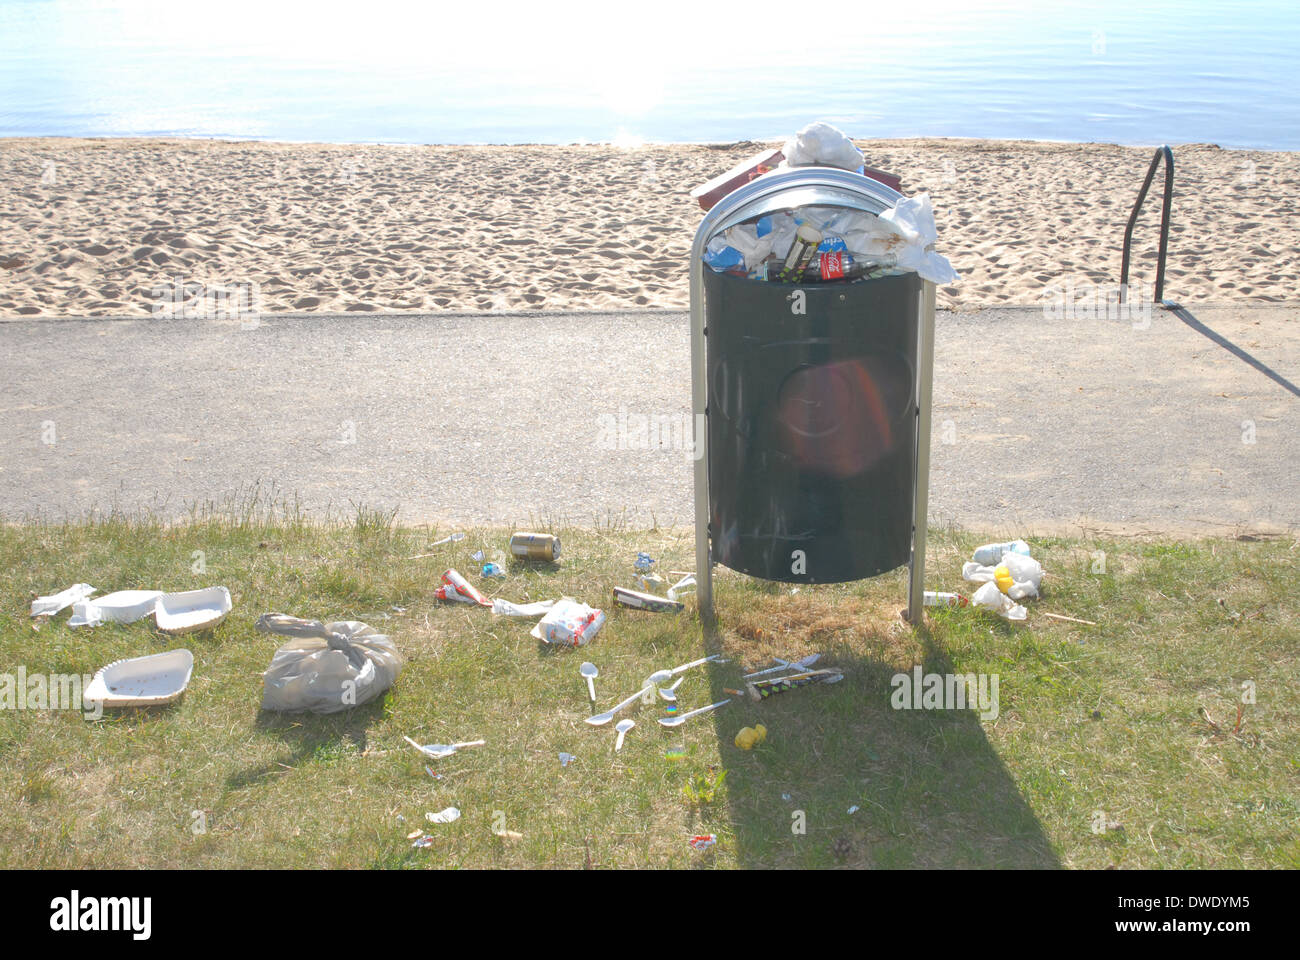 Beach view with full rubbish bin and rubbish covering the ground. Stock Photo